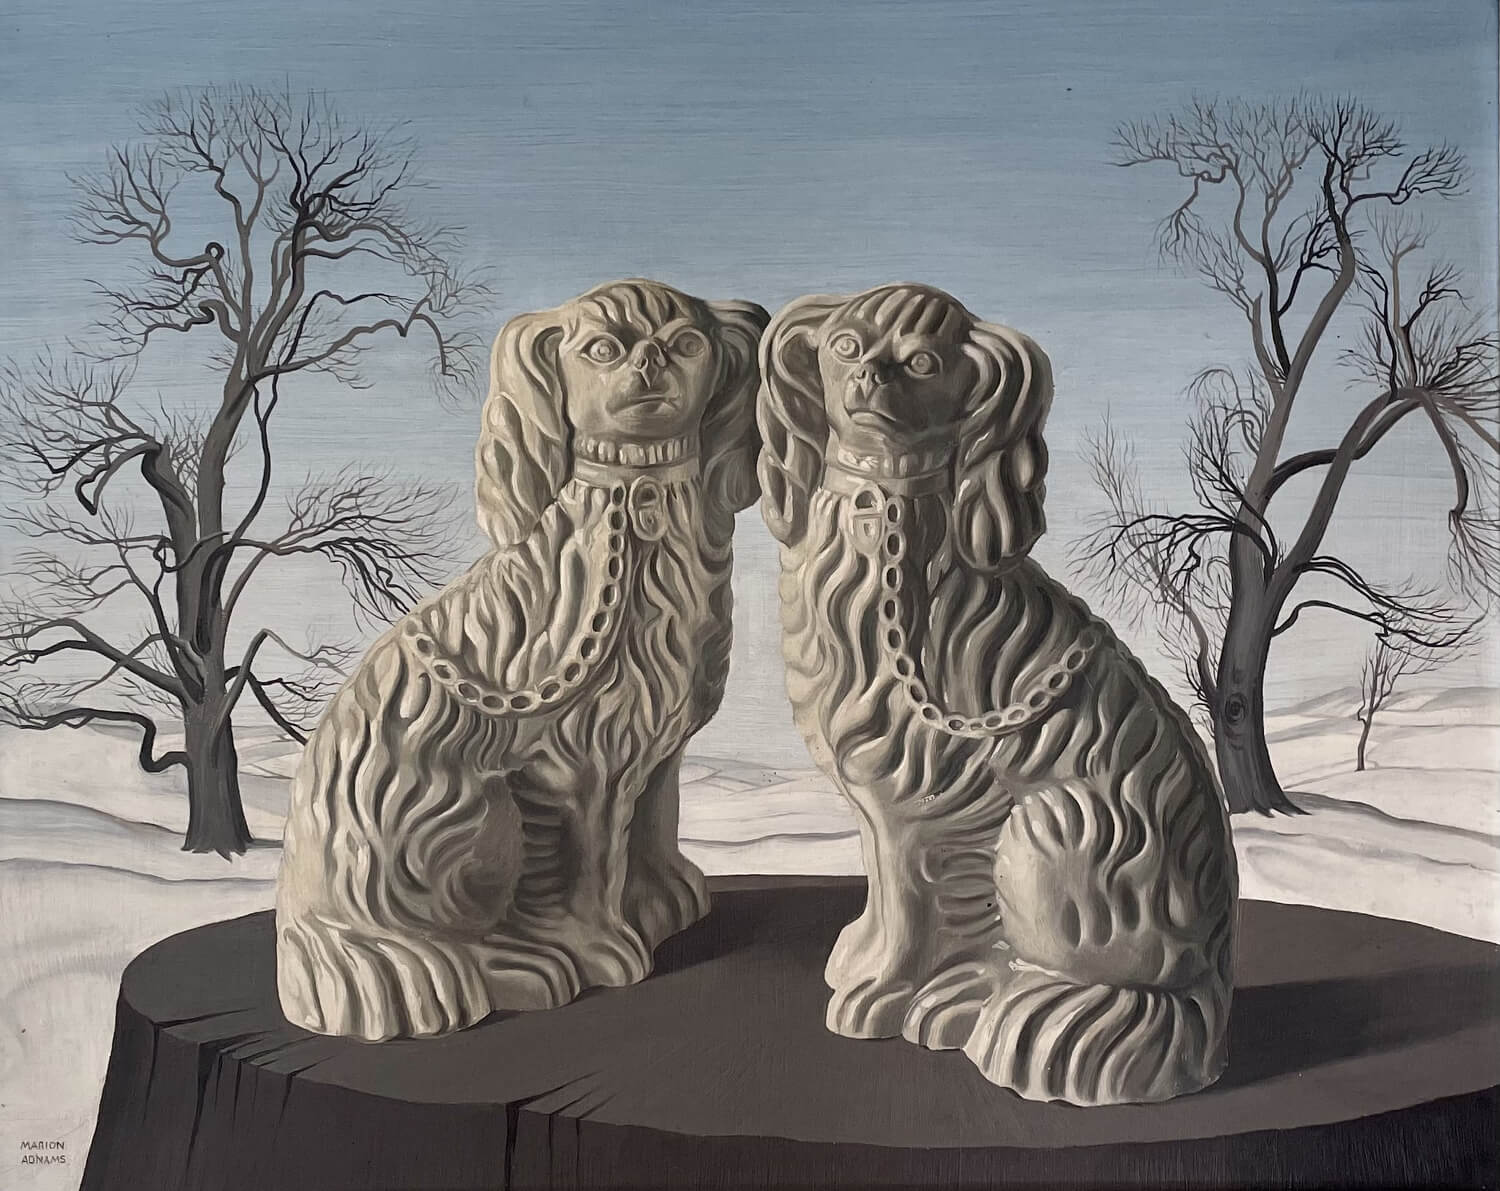 Marion Adnams - The Twins